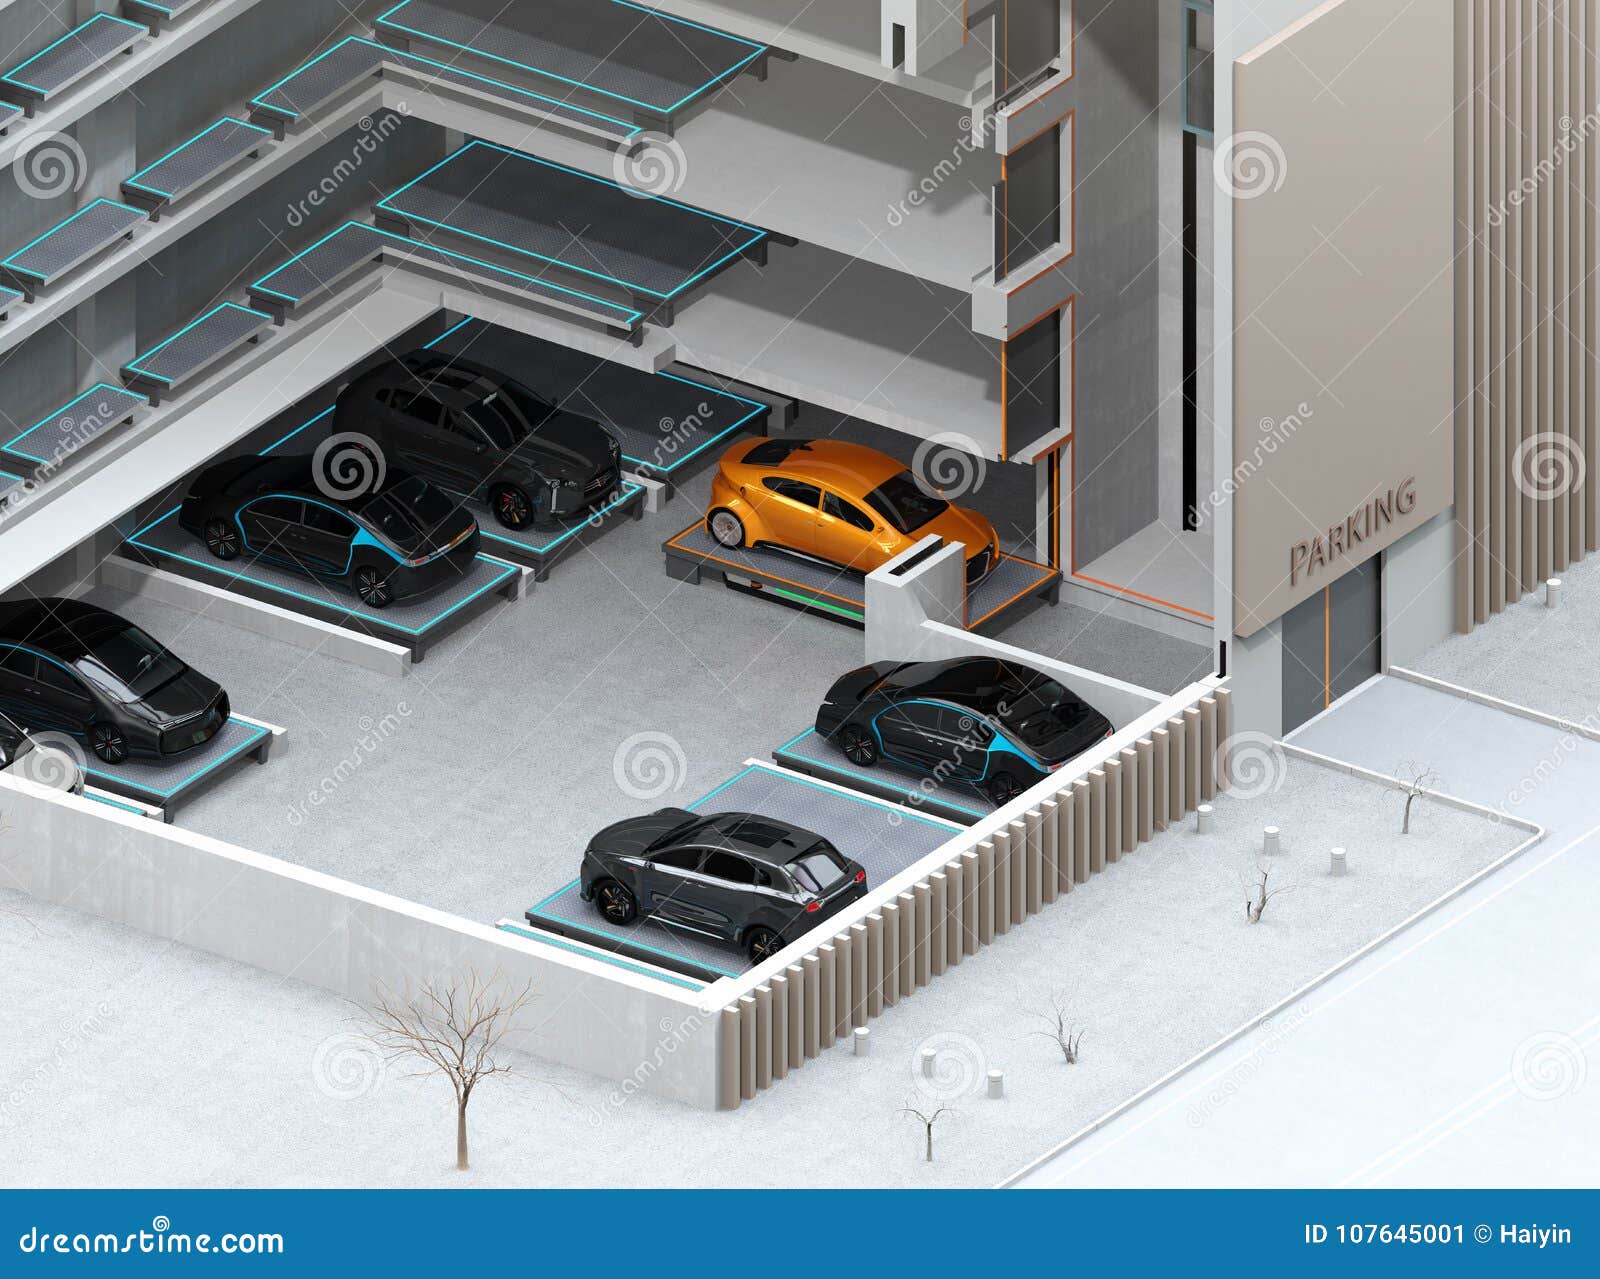 Cutaway Concept Image For Automatic Car Parking System By Agv